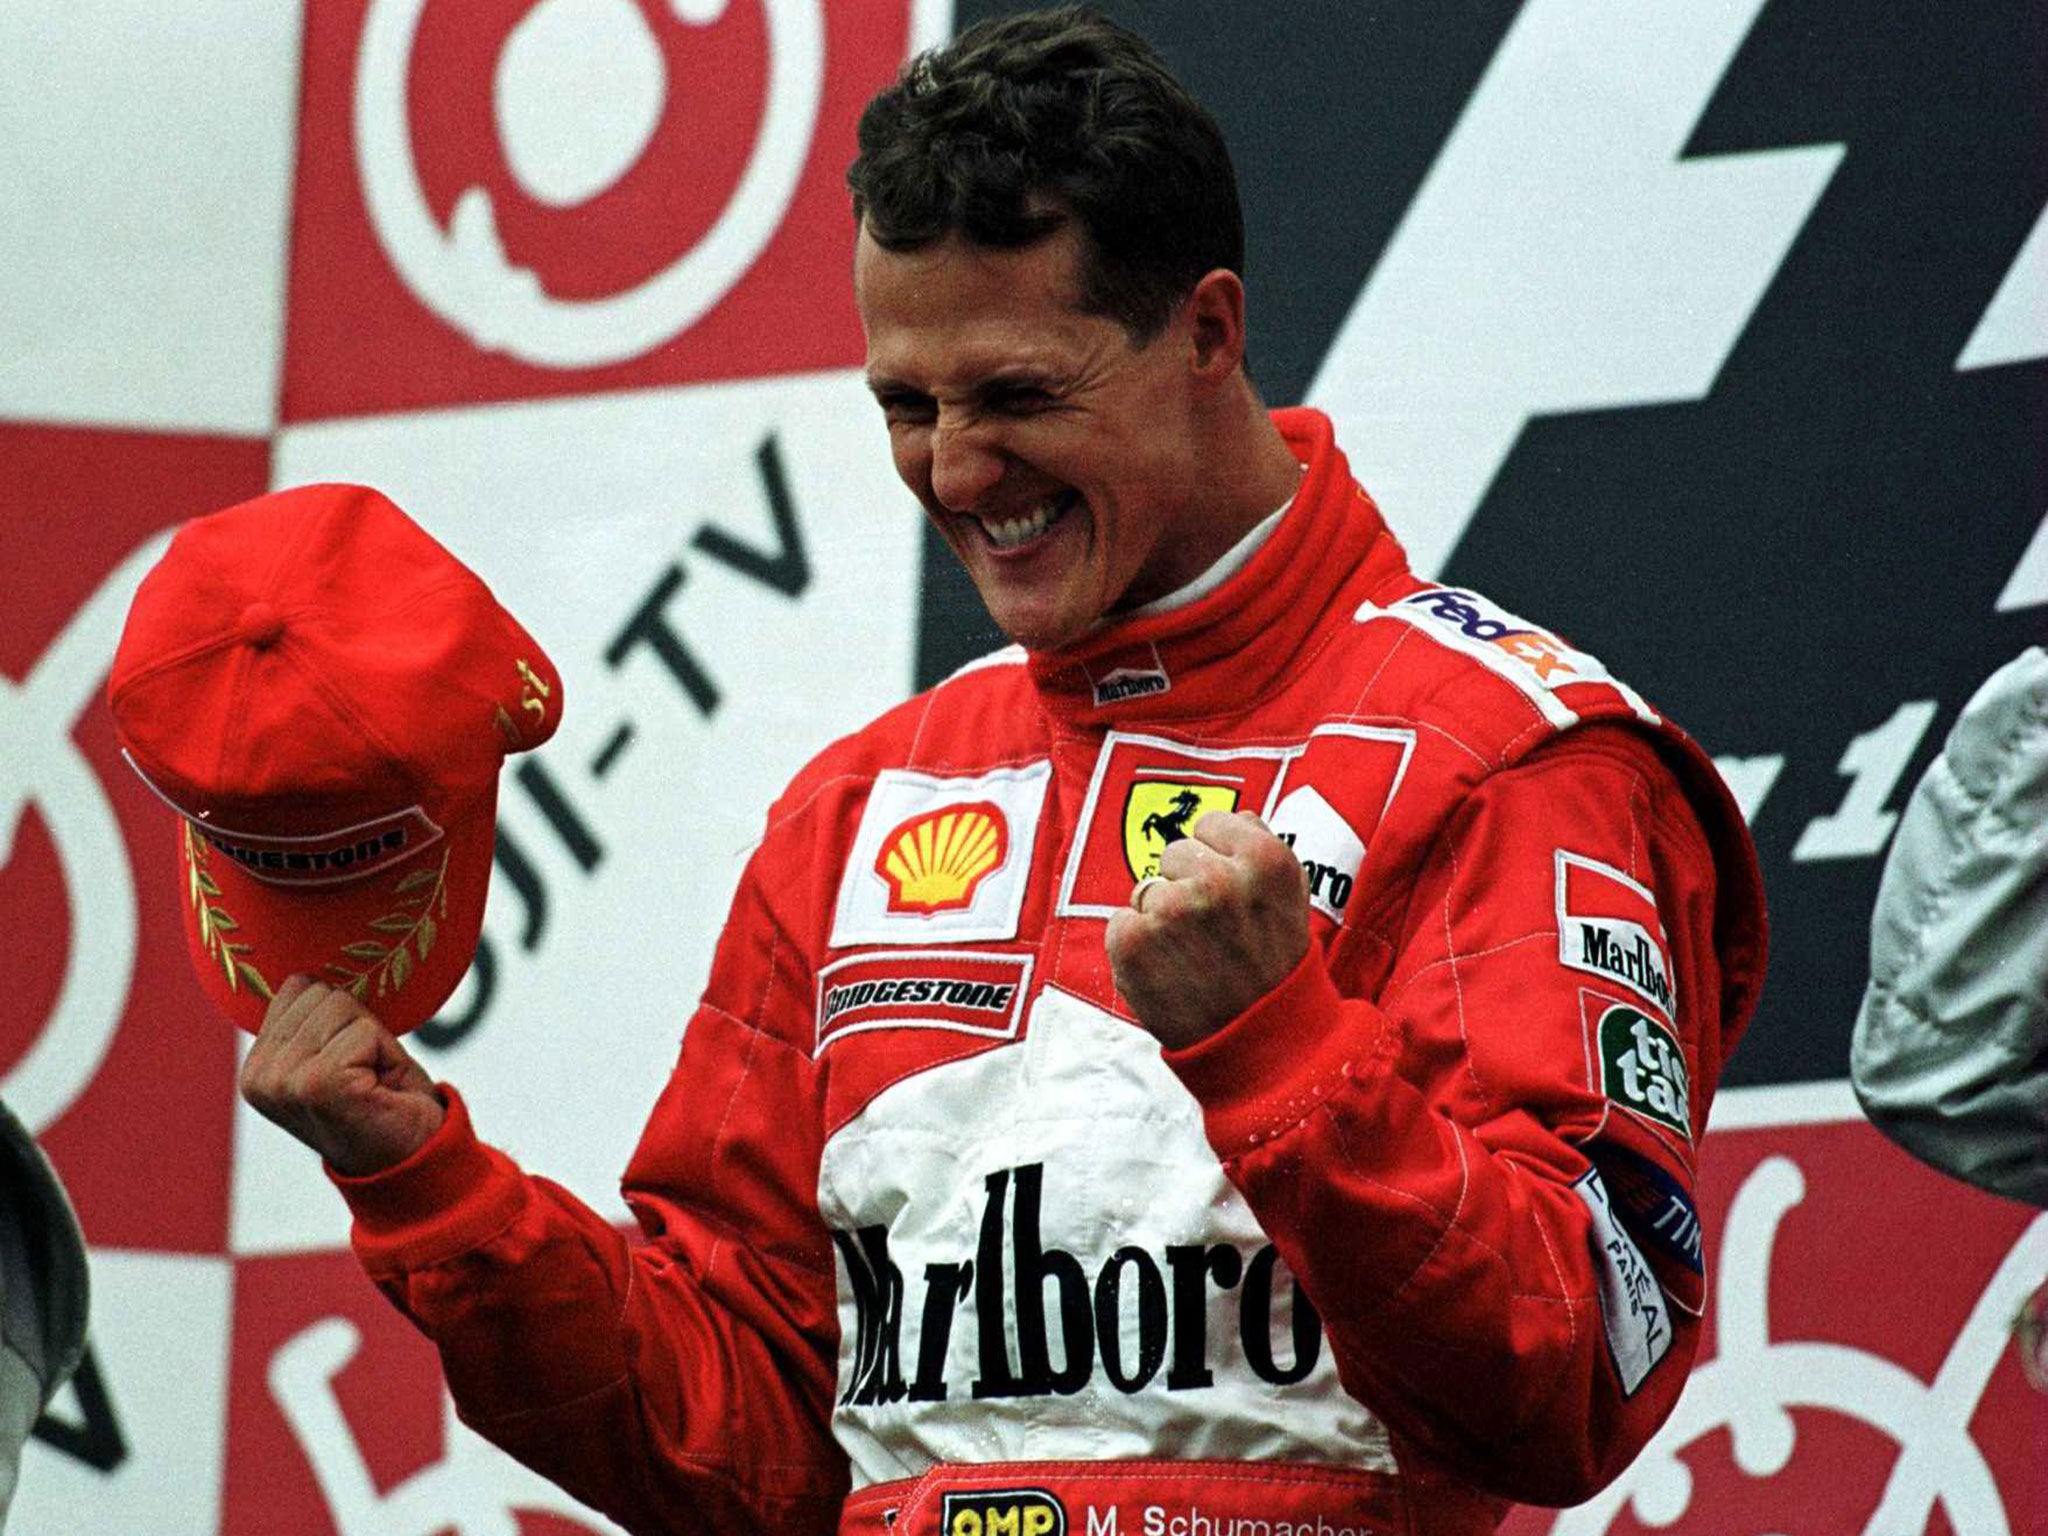 Schumacher selected his 2000 world championship triumph at Suzuka as his most emotional title win